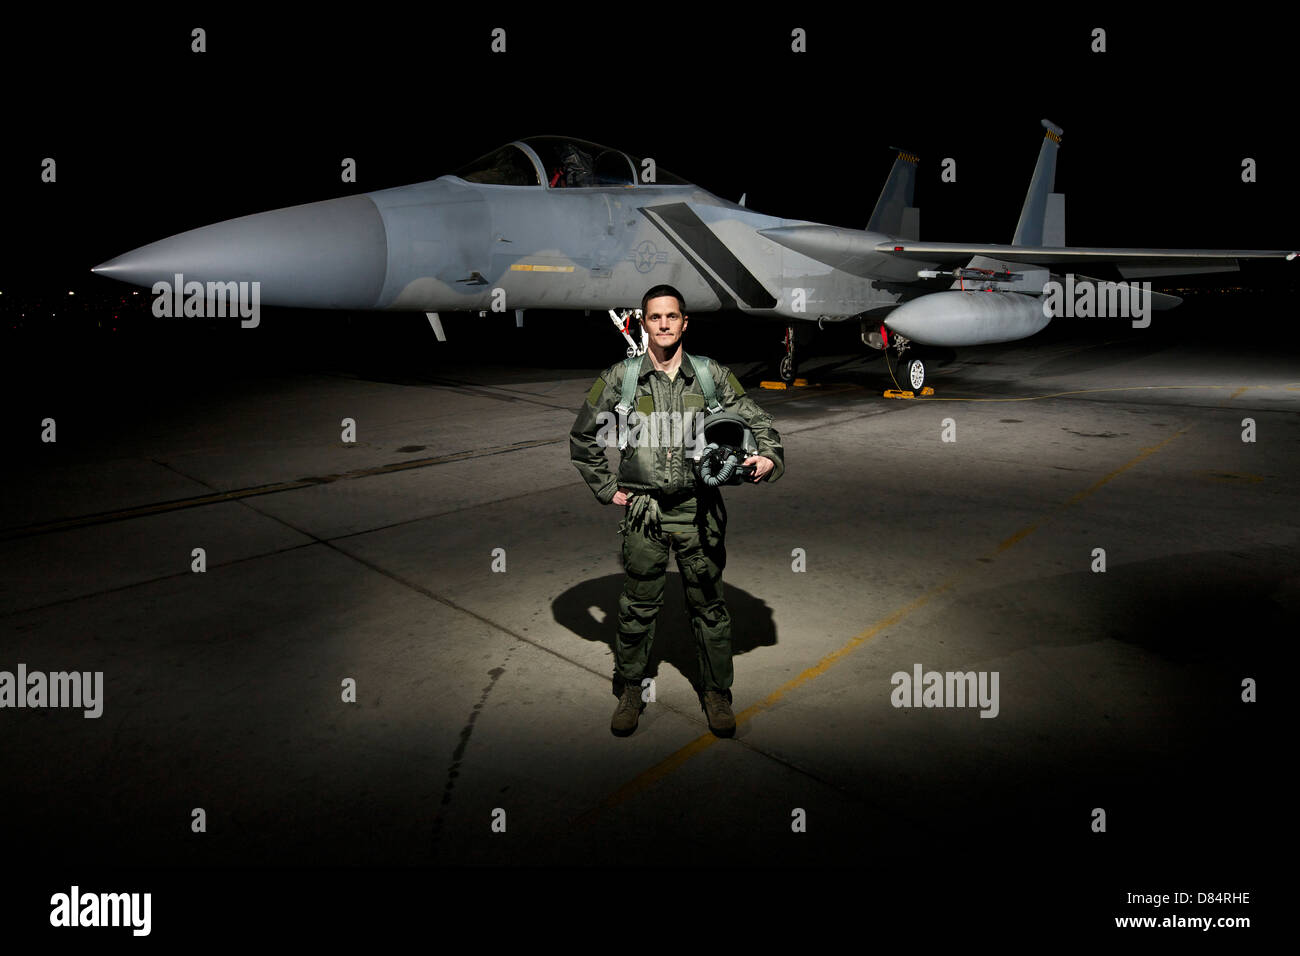 A U.S. Air Force pilot stands in front of a McDonnell Douglas F-15C aircraft. Stock Photo